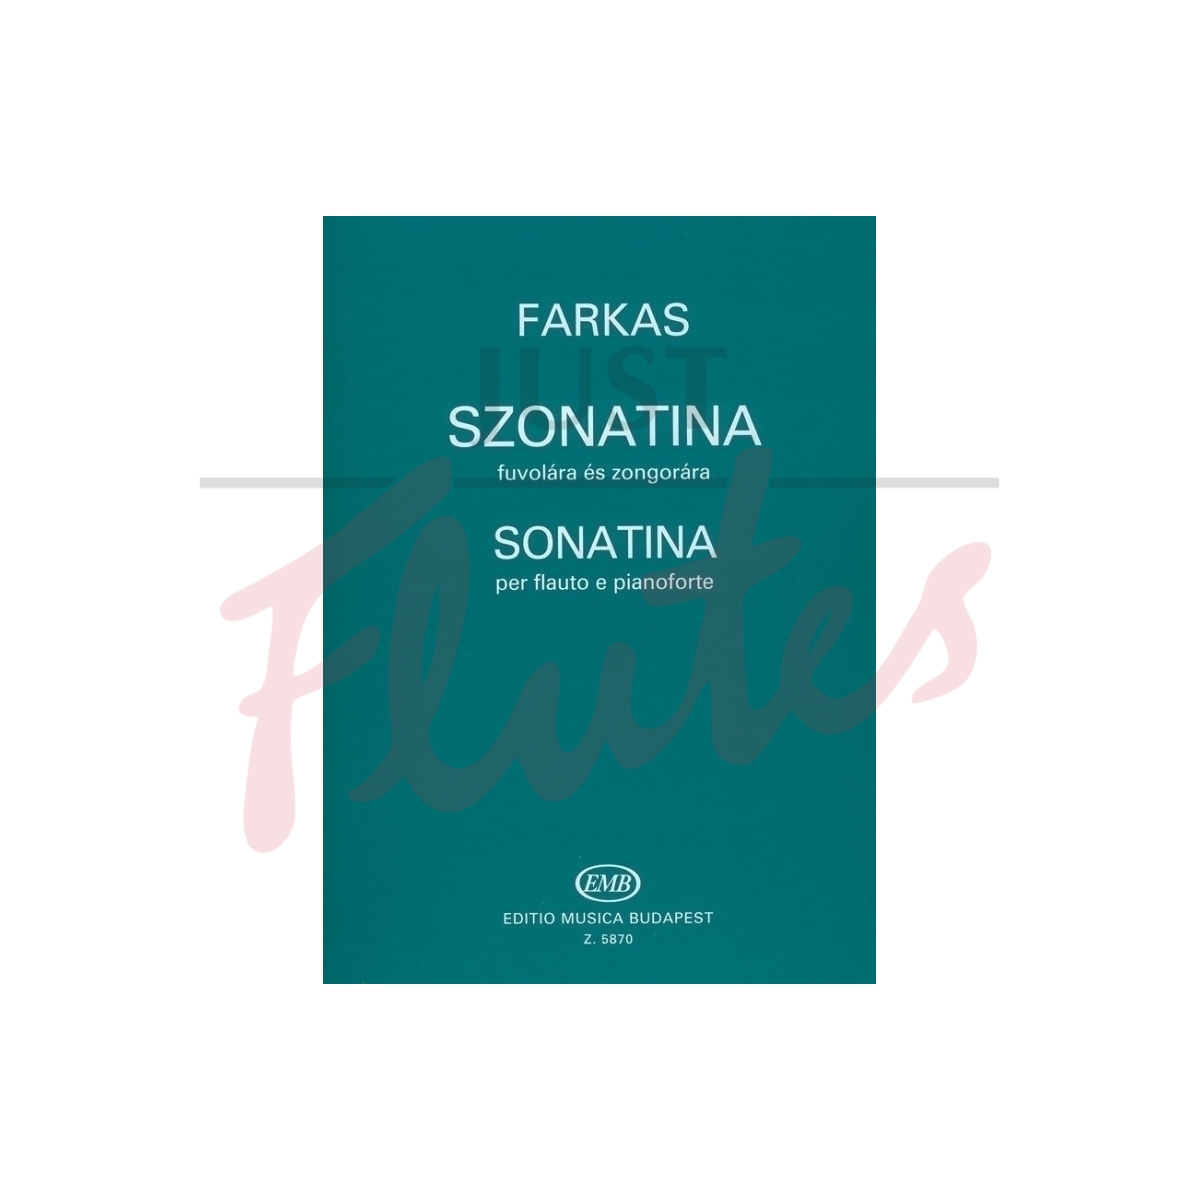 Sonatina for Flute and Piano